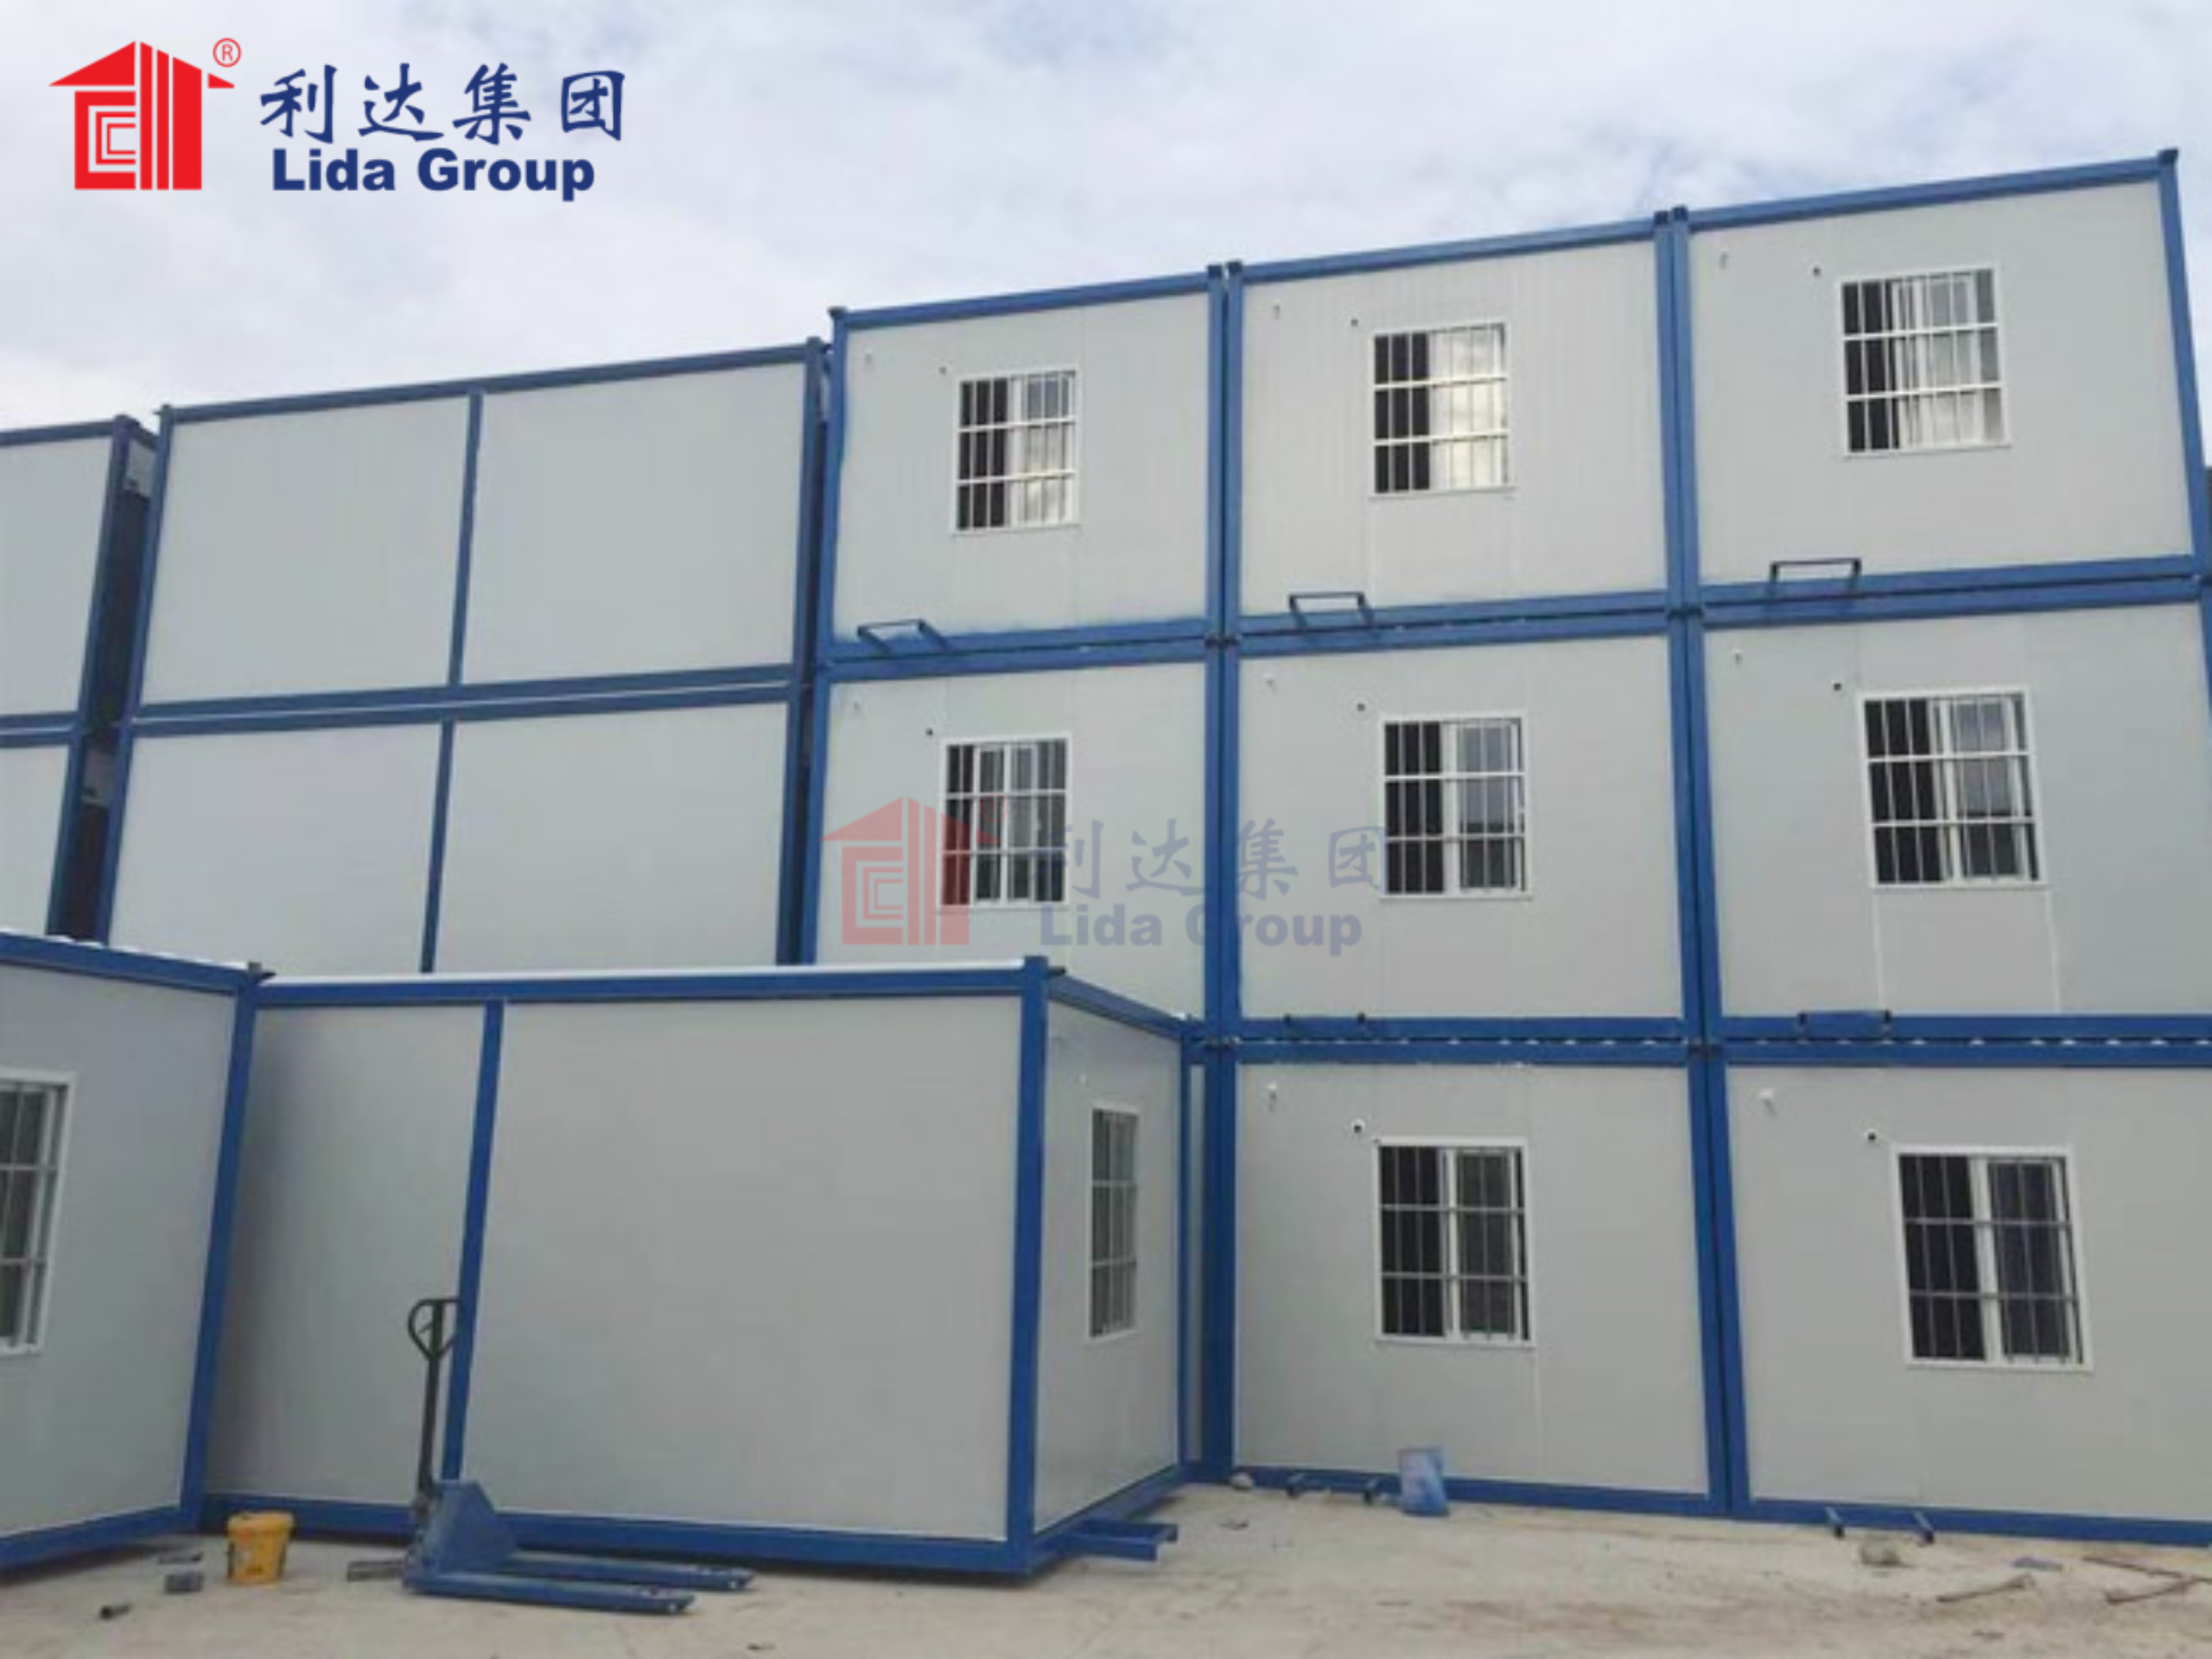 Engineers Study Thermal Performance of Prototype Container Housing Units Manufactured by Lida Group for Isolated Mining Community Housing Harsh Arctic Conditions Year-Round